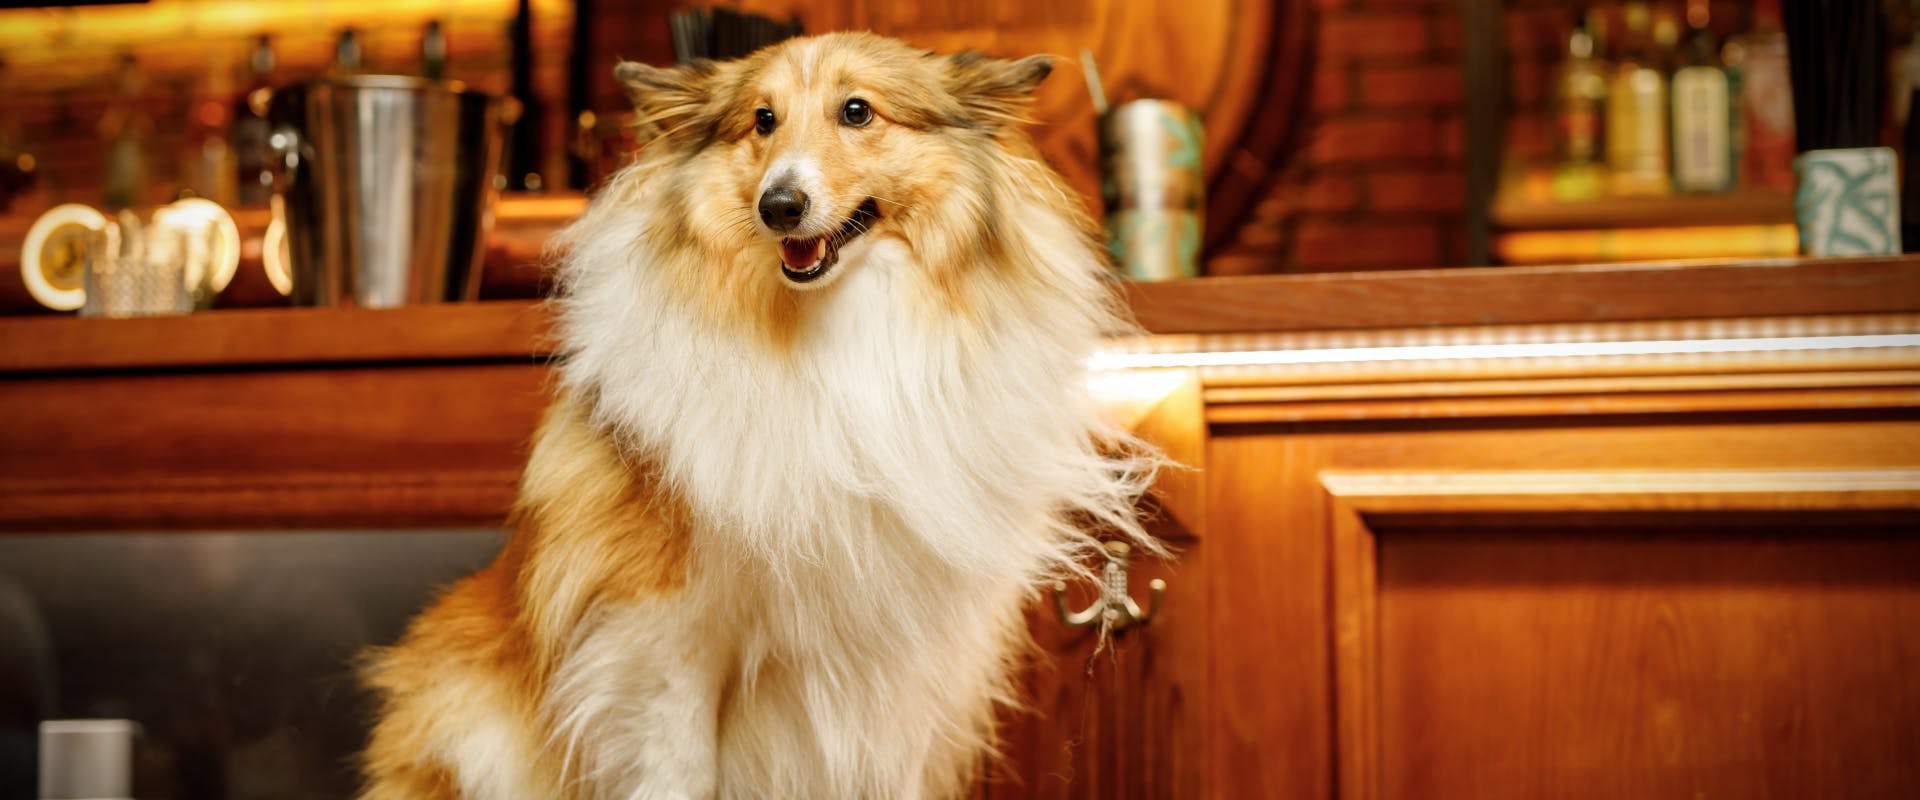 collie dog sat on a bar stool in a dog friendly pub waiting for free dog biscuits